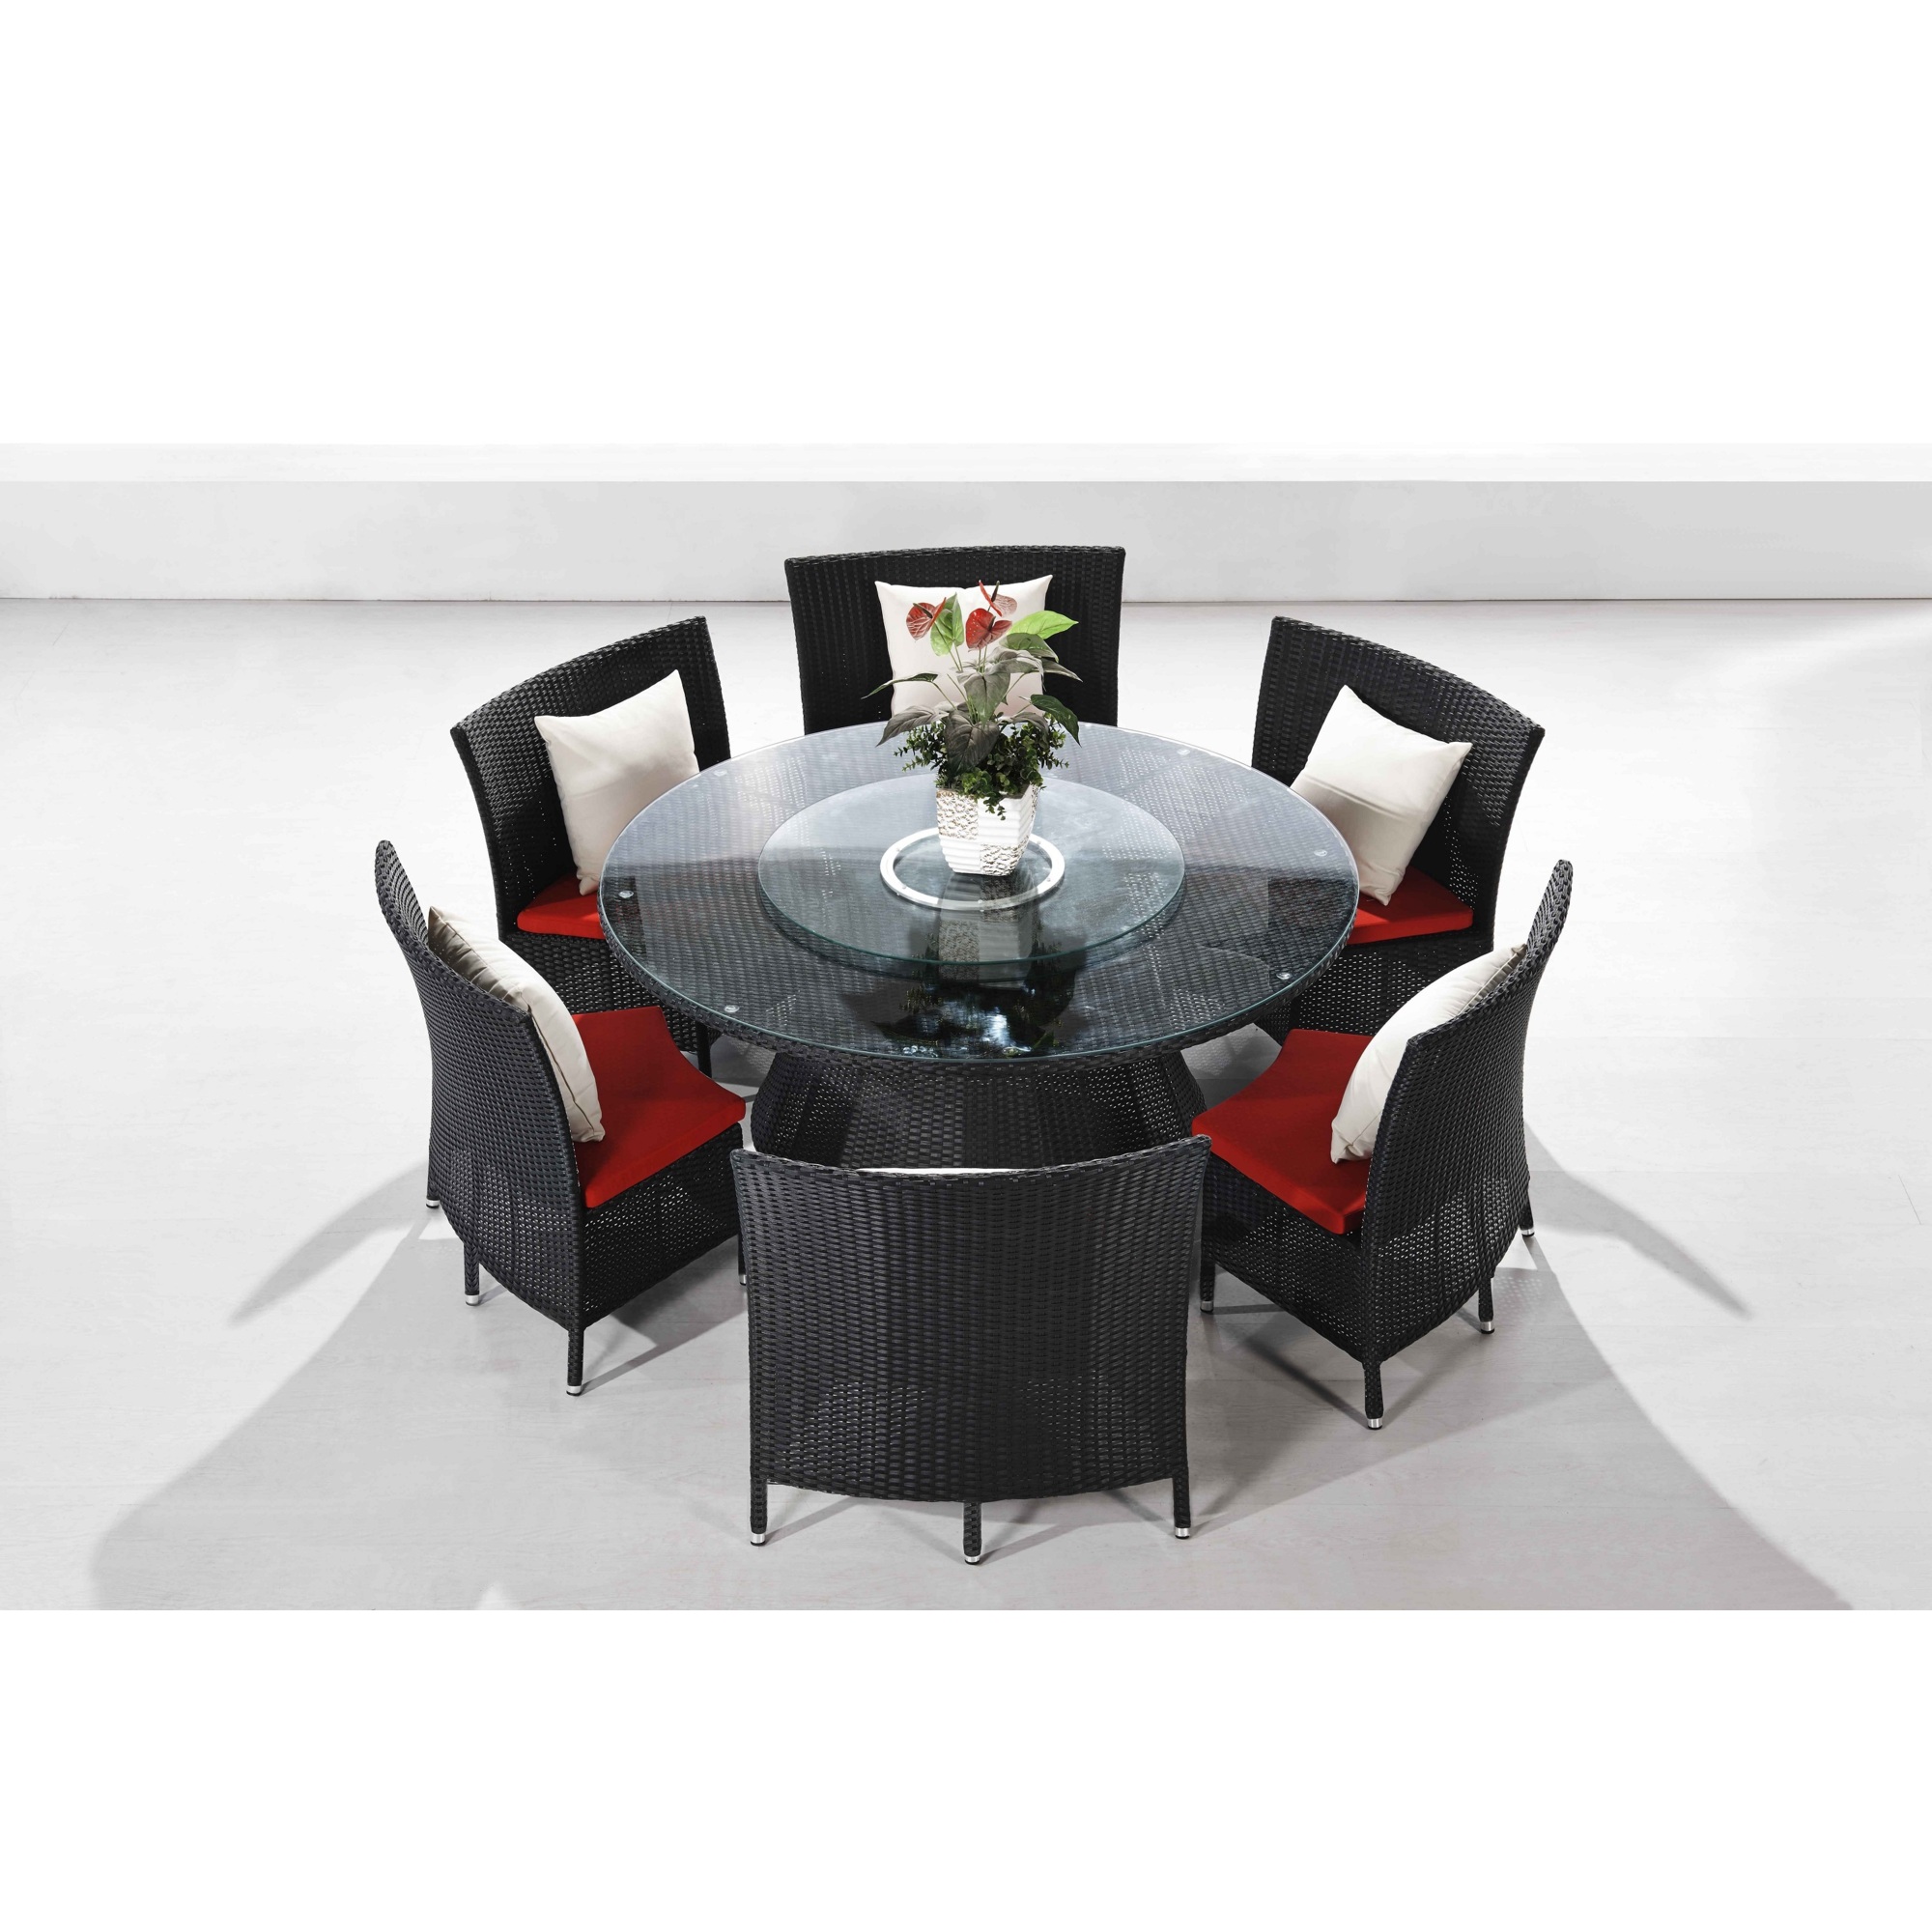 Manhattan Comfort, Nightingdale Black 7Pc Outdoor Dining Set Red, Pieces (qty.) 7 Primary Color Red, Seating Capacity 6 Model OD-DS001